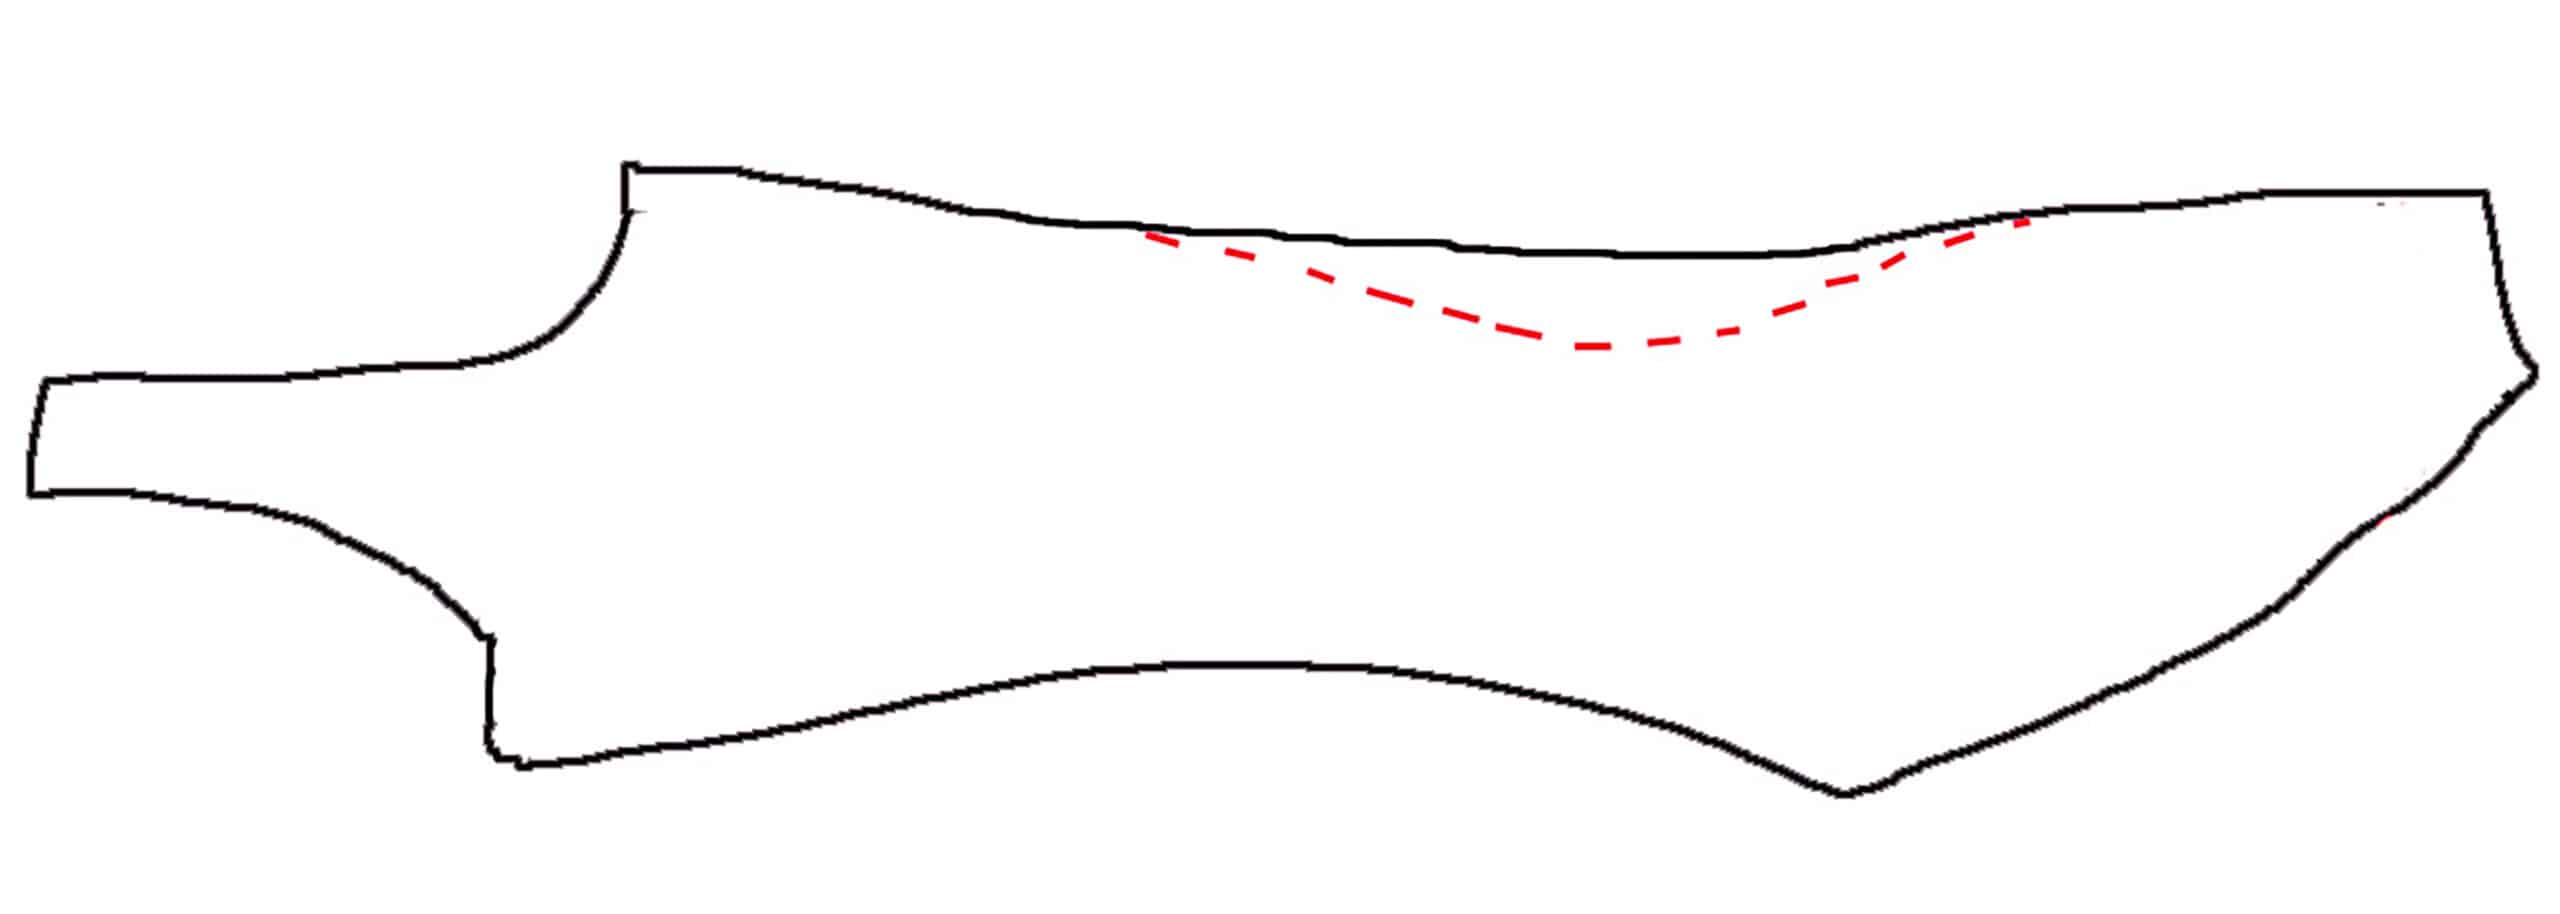 A hand drawn diagram showing how to adjust a pattern for a deeper curve in the back.